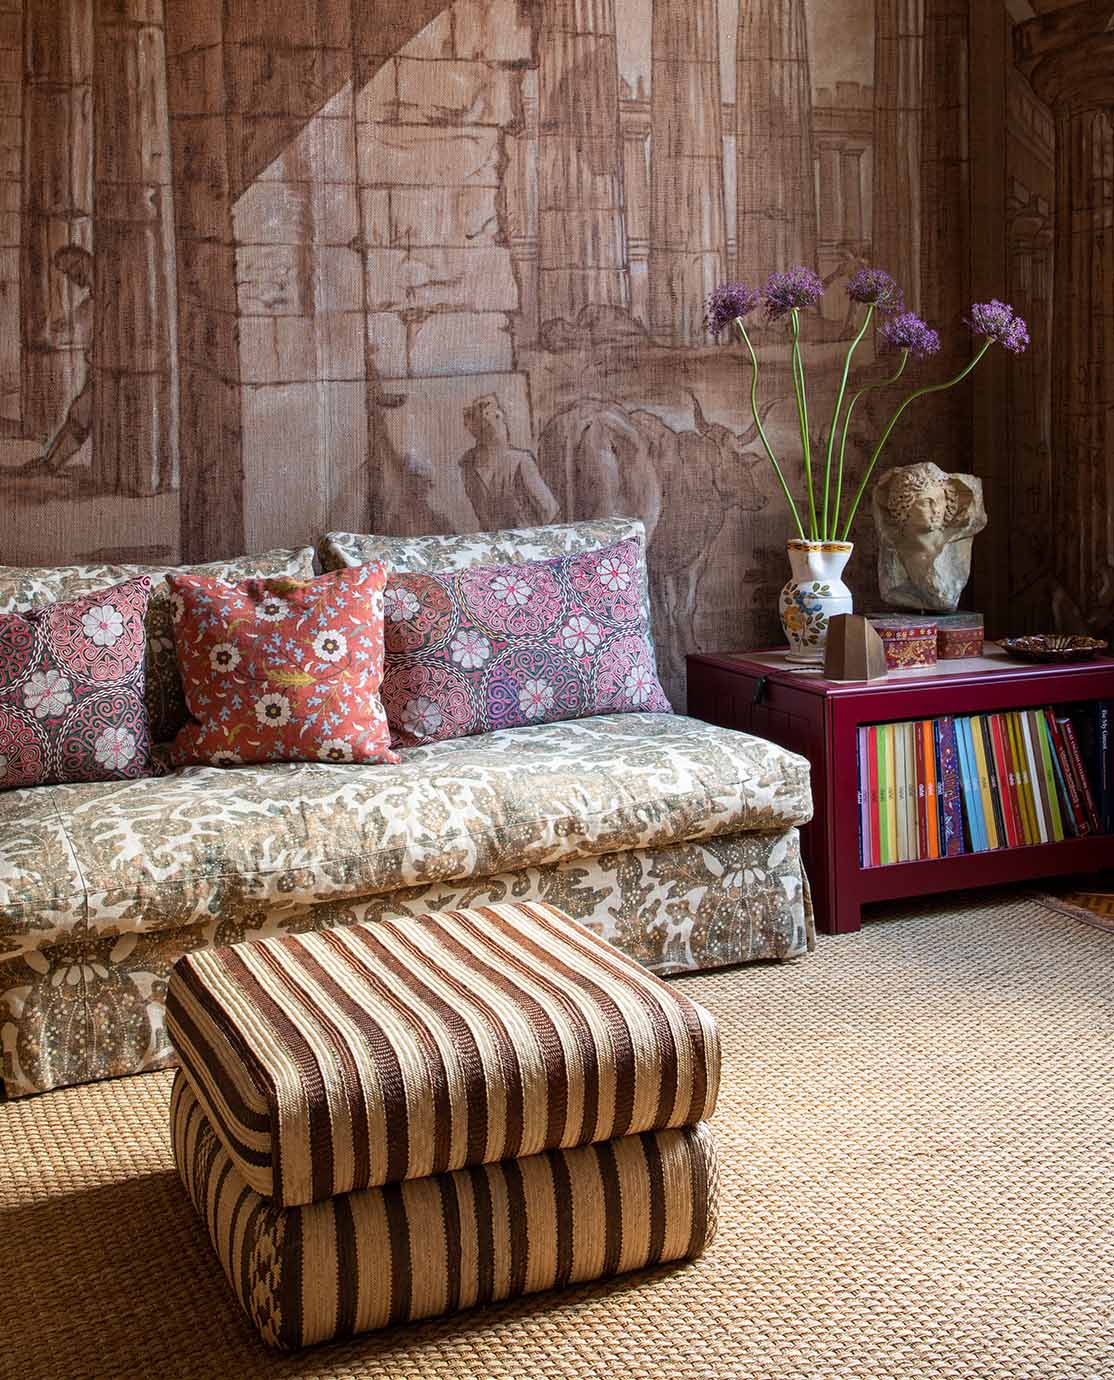 A green floral sofa decorated with pink and purple floral pillows and a striped ottoman sit in front of a mural of the Peastum ruins in Italy